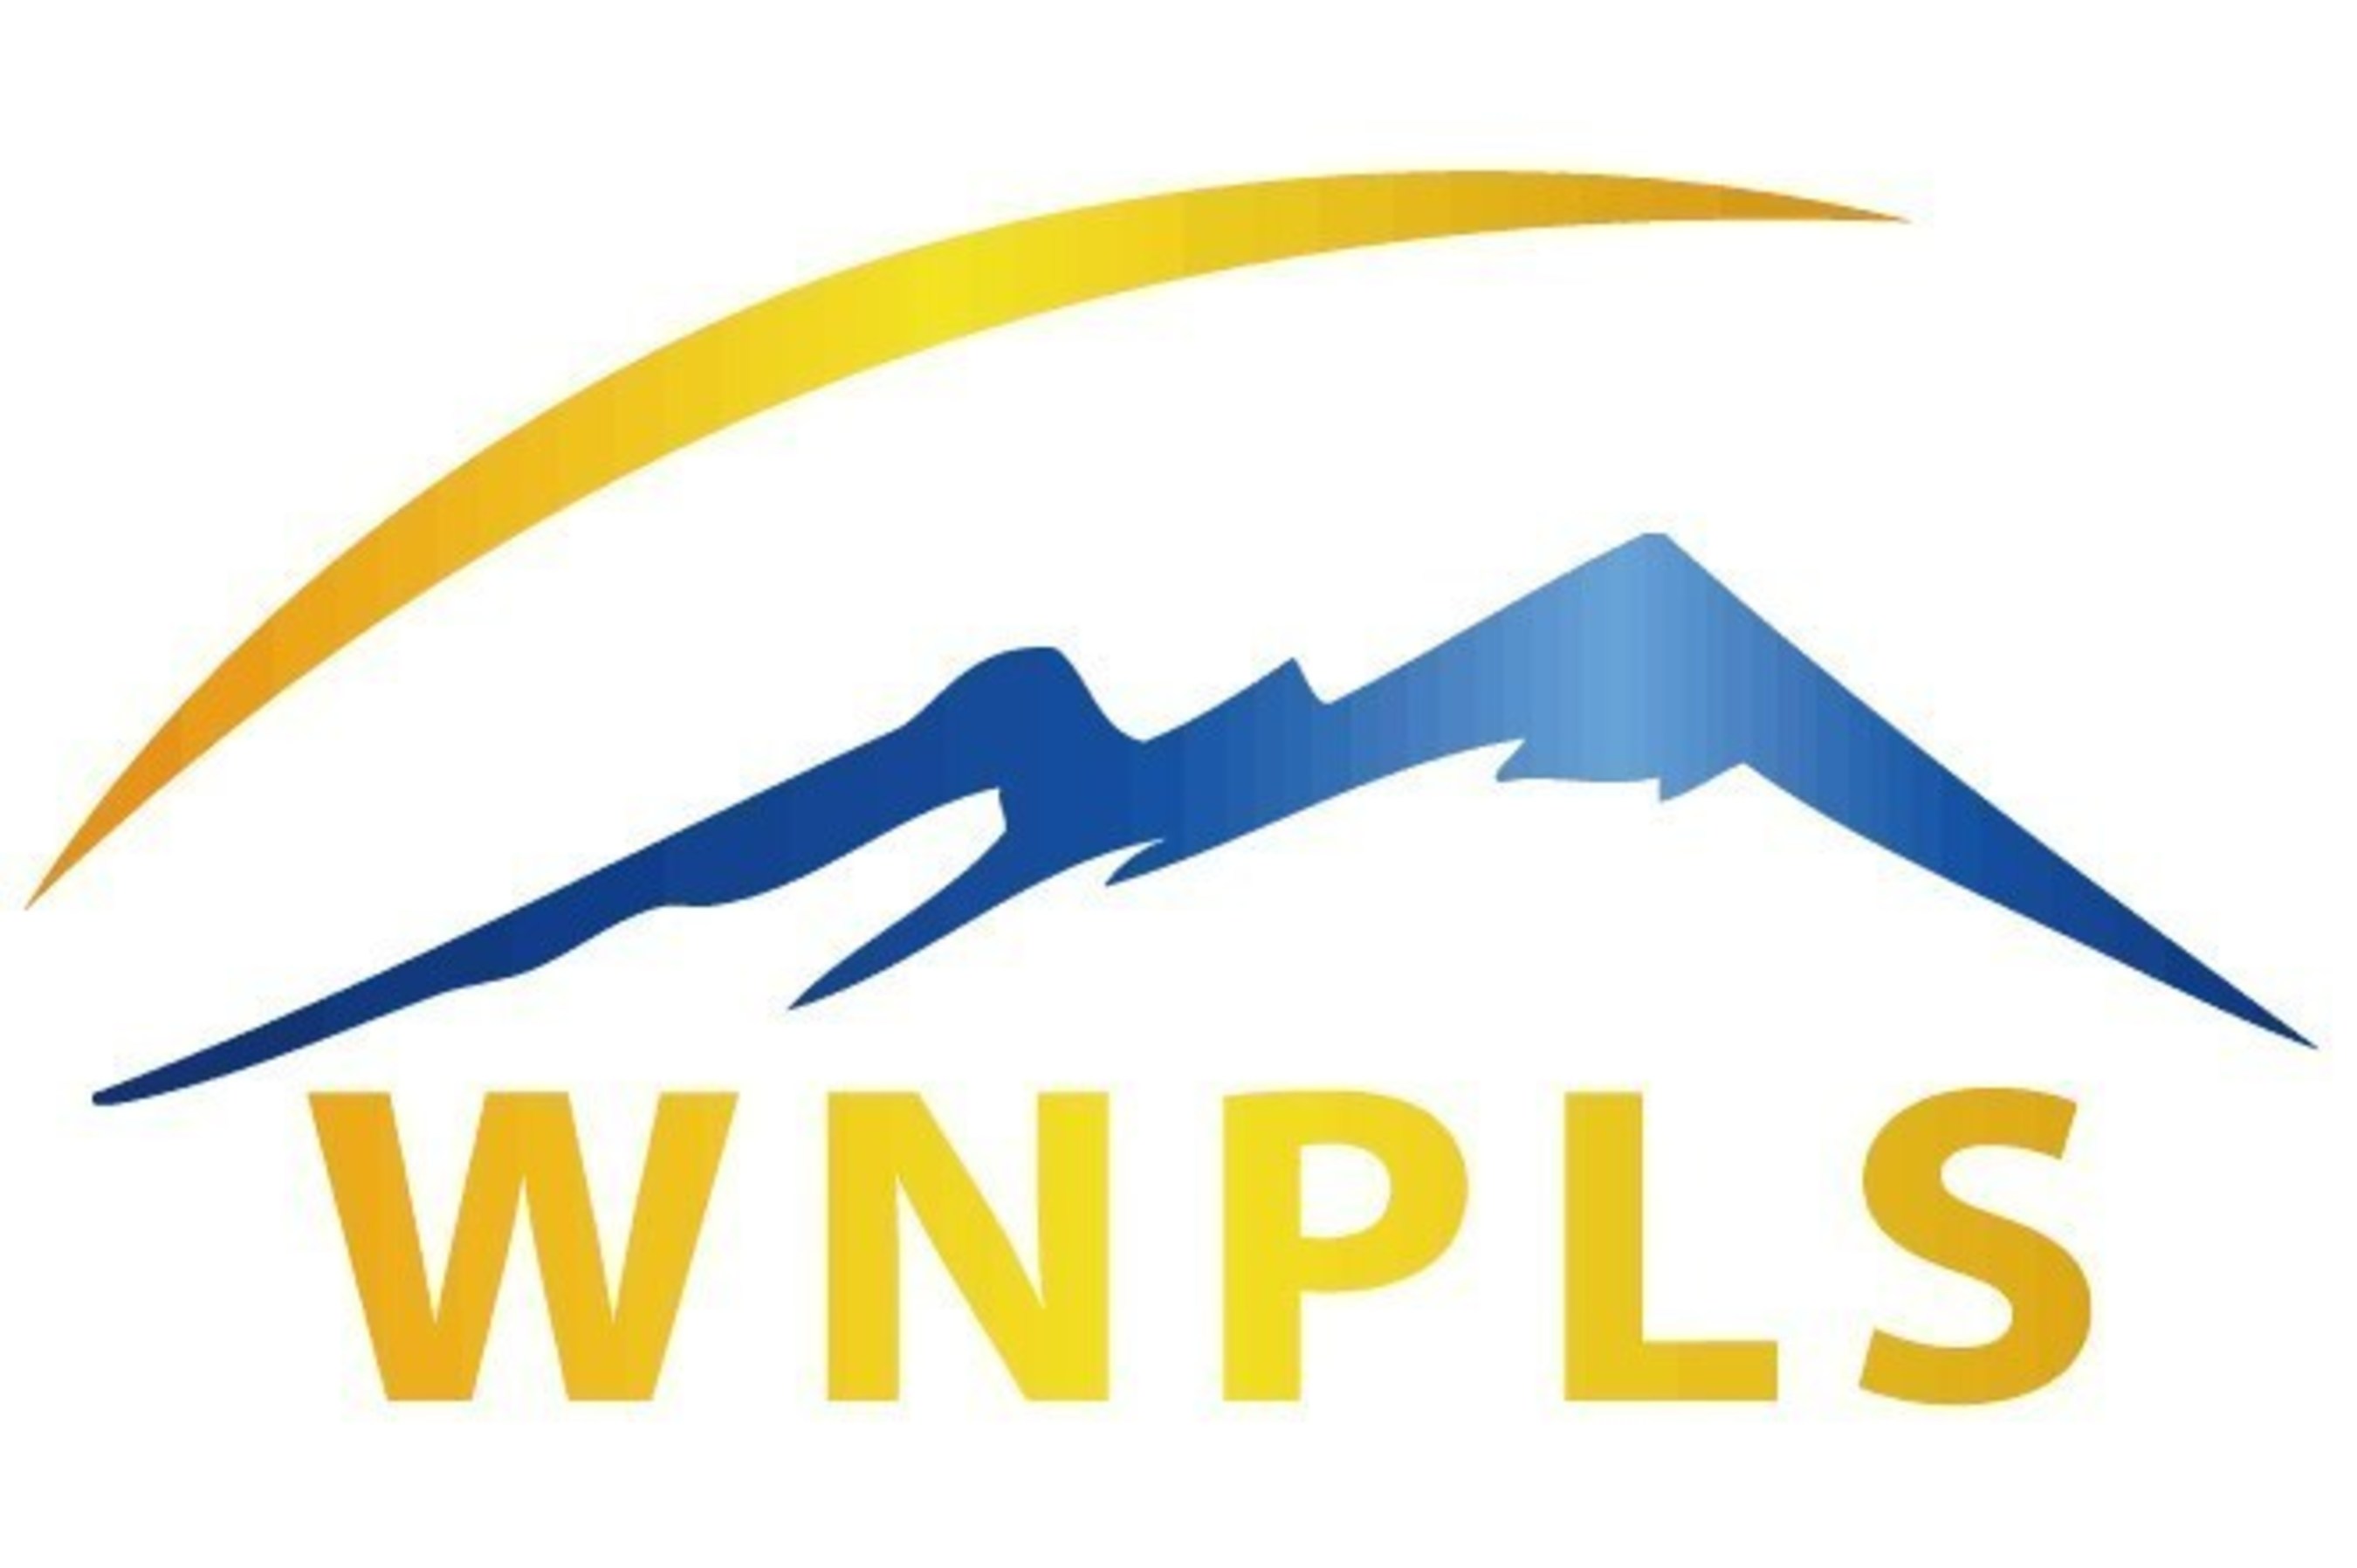 Six Nobel Prize Laureate's and over 20 internationally acclaimed researchers and scientists, will present at the third annual, "World Nobel Prize Laureate Summit" (WNPLS) in Chengdu, China, September 1-3, 2016. The 2016 WNPLS' will feature three programs of scientific exploration: 1) "Anpac Bio World Youth Innovation Forum"; 2) "International Symposium for Precision Medicine"; and 3) the "Bio-Pharmaceutical Industry Forum".